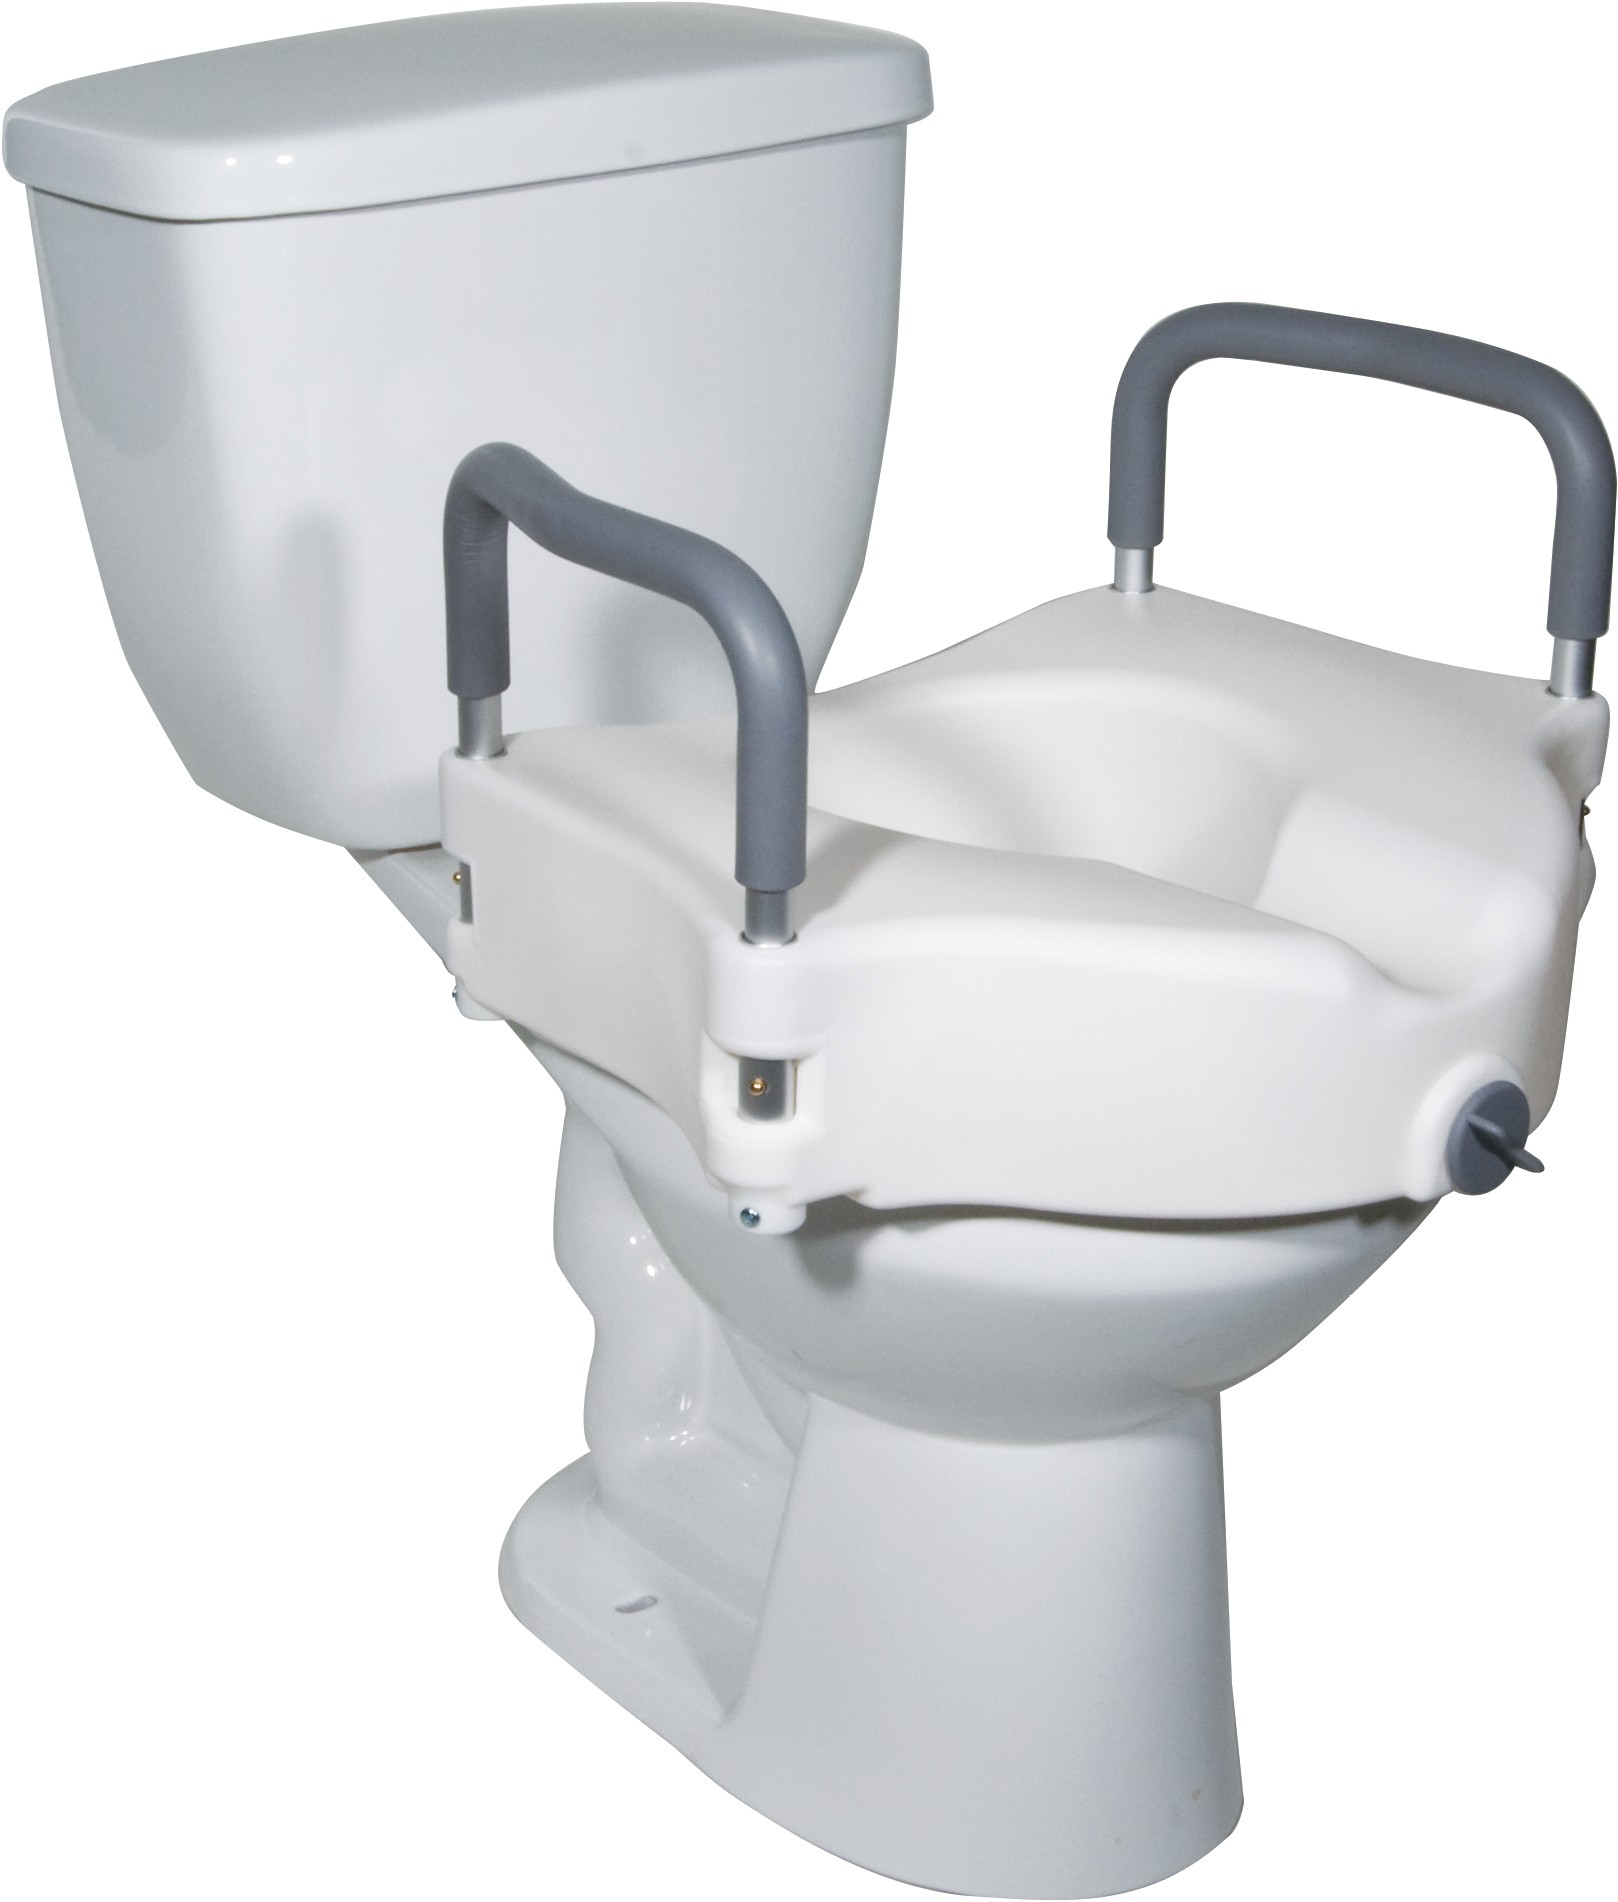 5”Elevated Toilet Seat with Removable padded arms